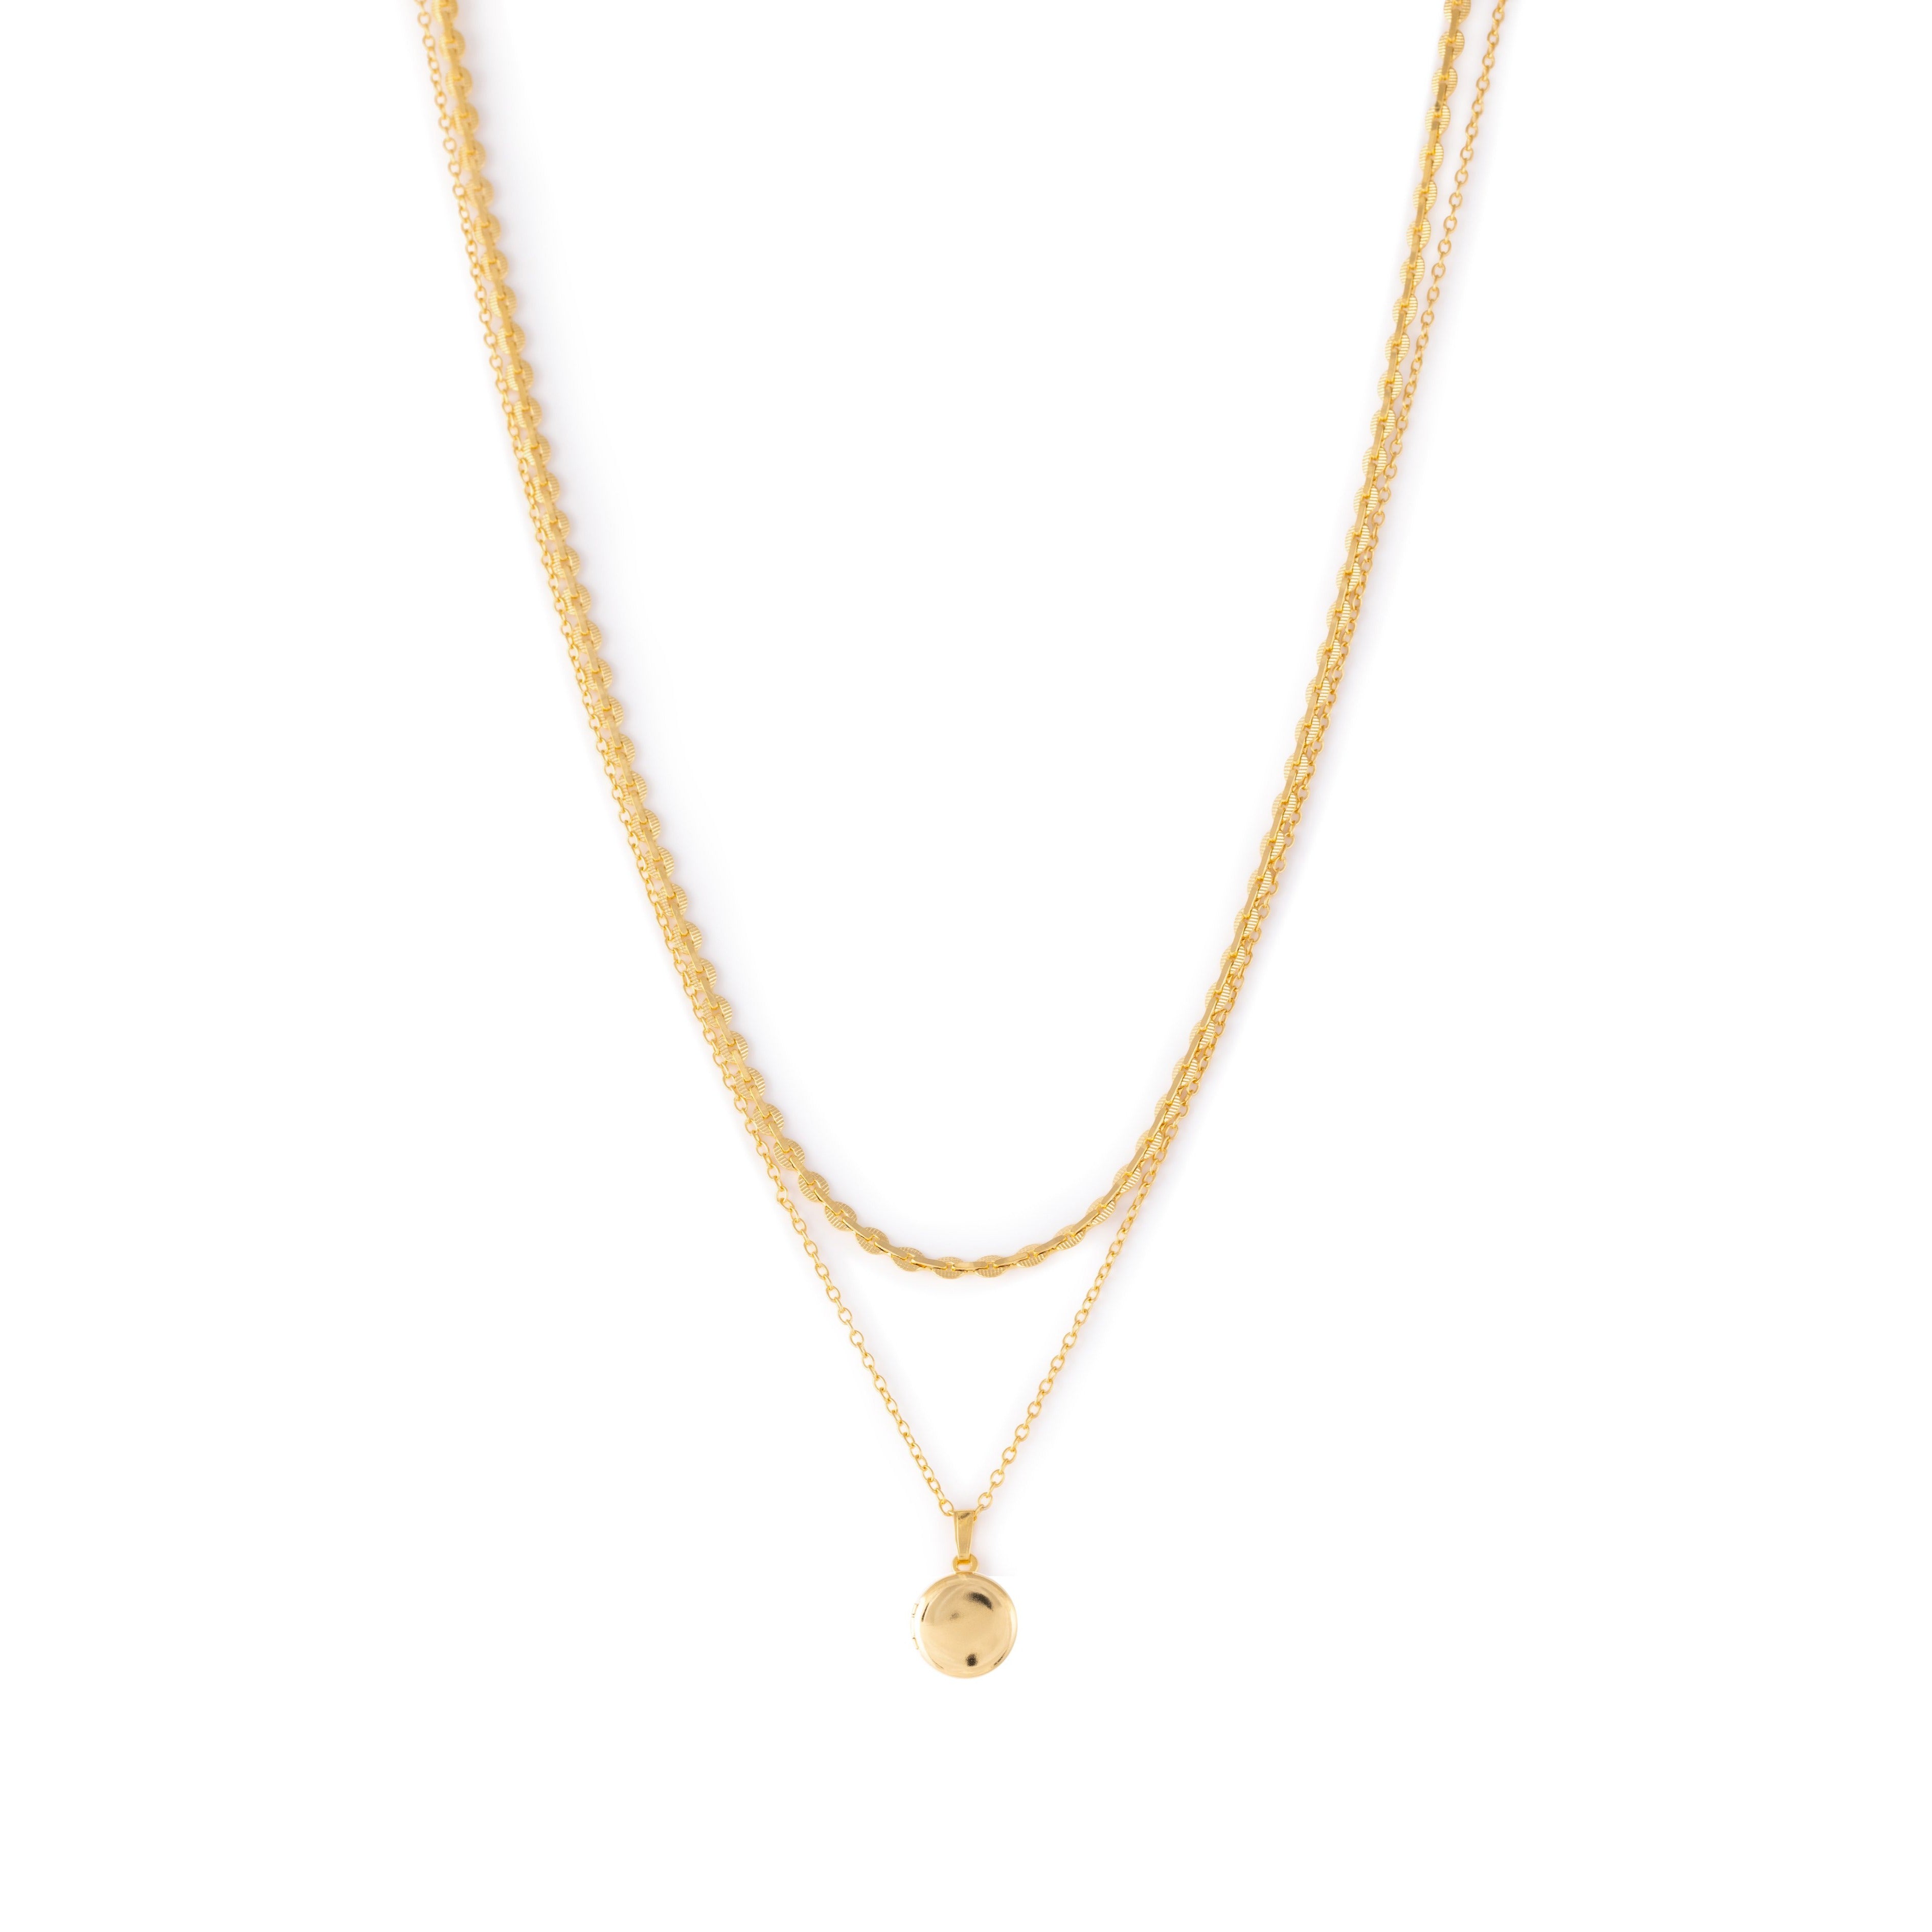 Double Chain Necklace with Circle Pendant in gold